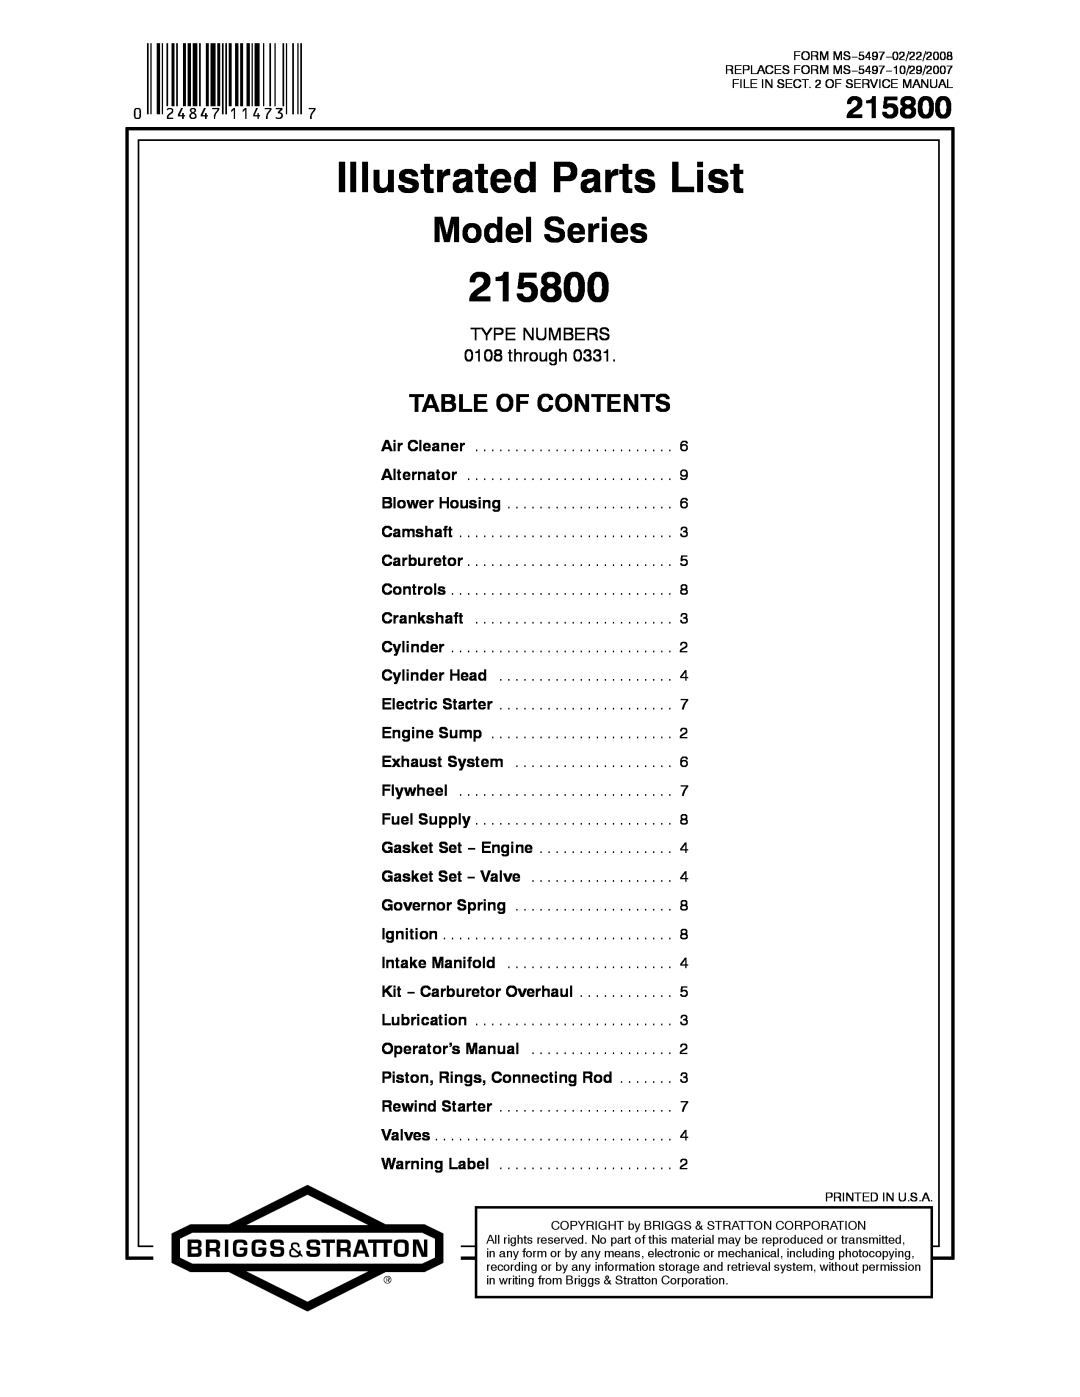 Briggs & Stratton 215800 service manual Model Series, Illustrated Parts List, Table Of Contents, TYPE NUMBERS 0108 through 